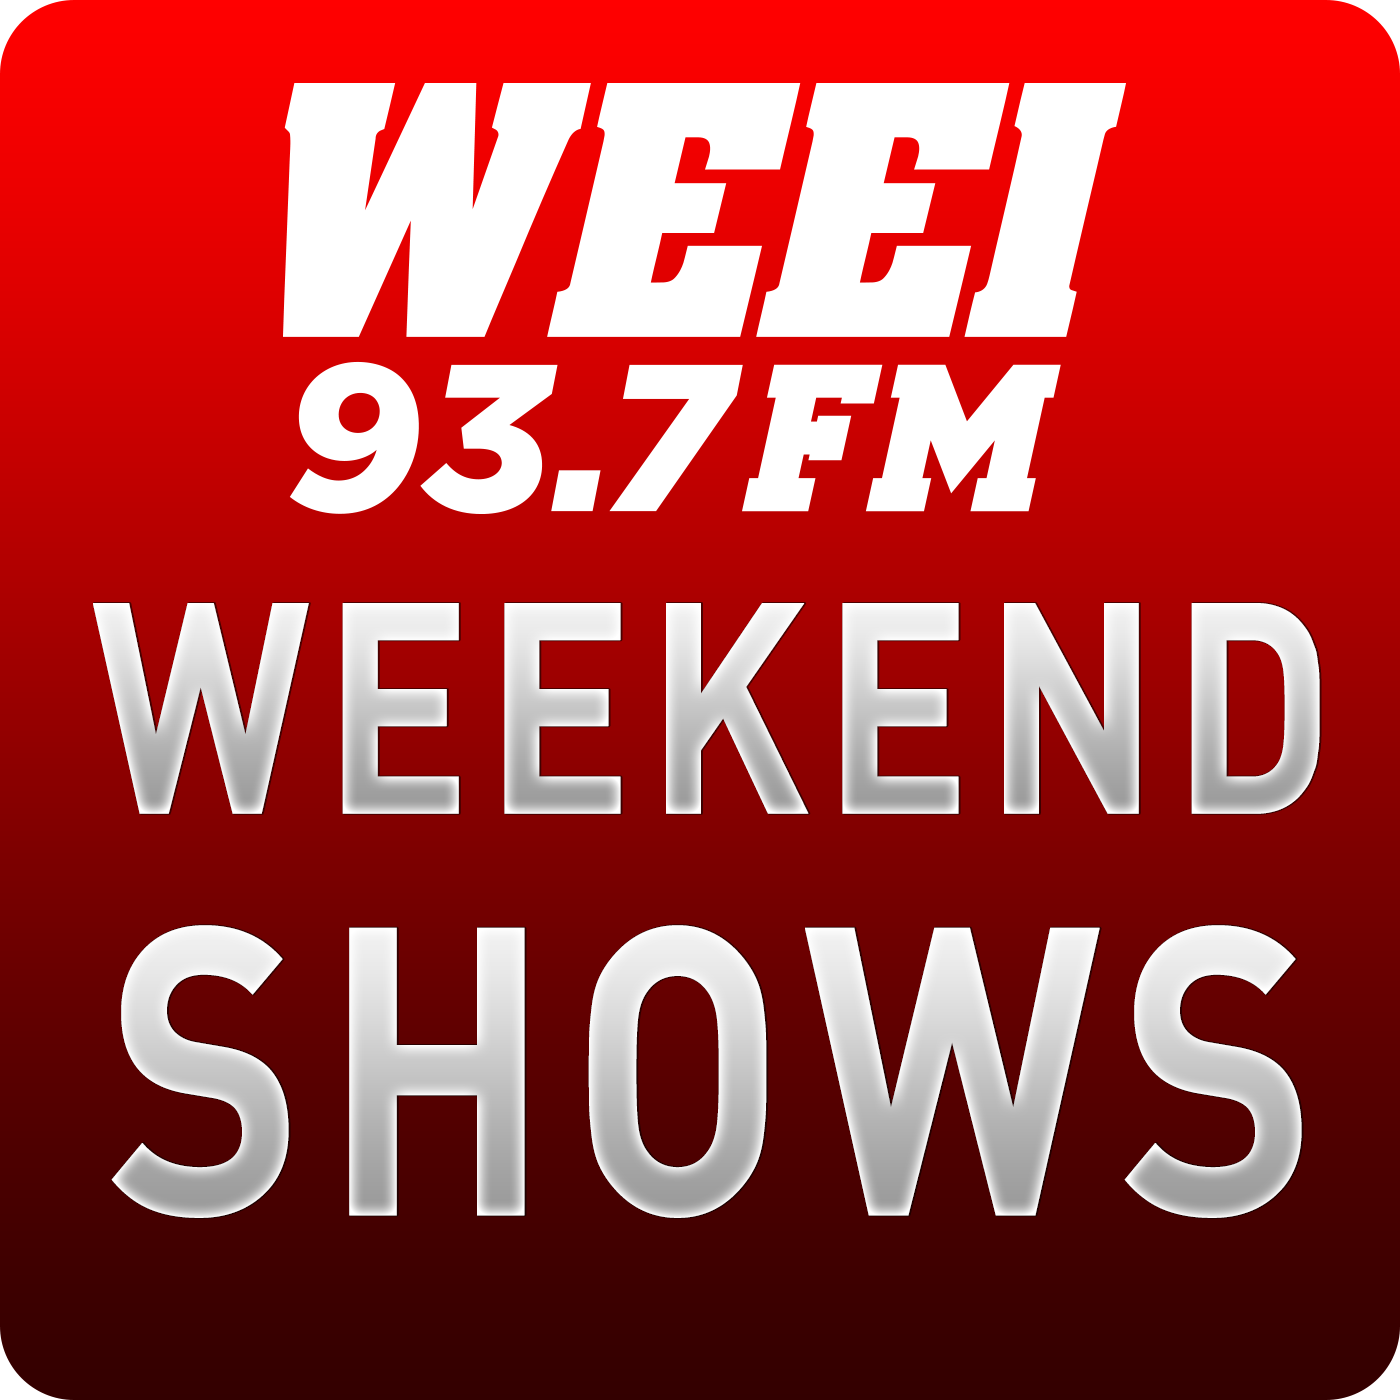 WEEI Football Sunday - Reviewing college football playoffs